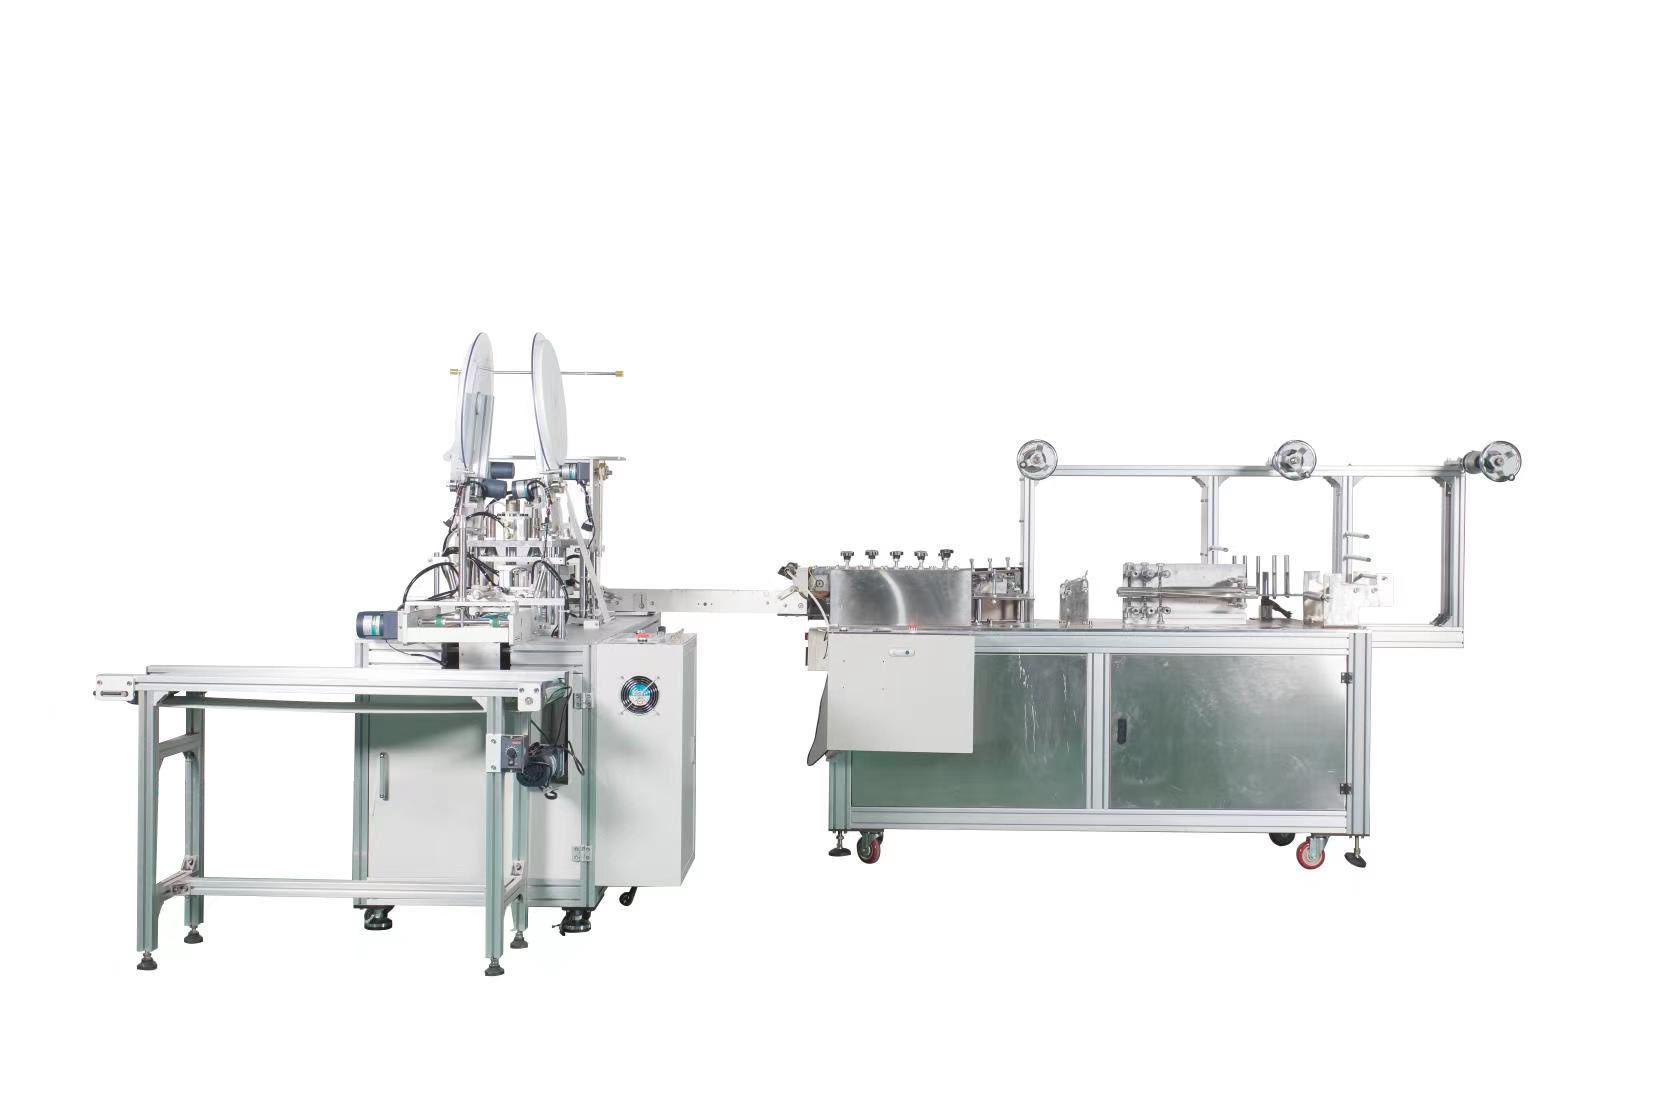 Air Covering Folded Mask Making Cotton Waste Process Machine Mask Equipment (Practical Type)